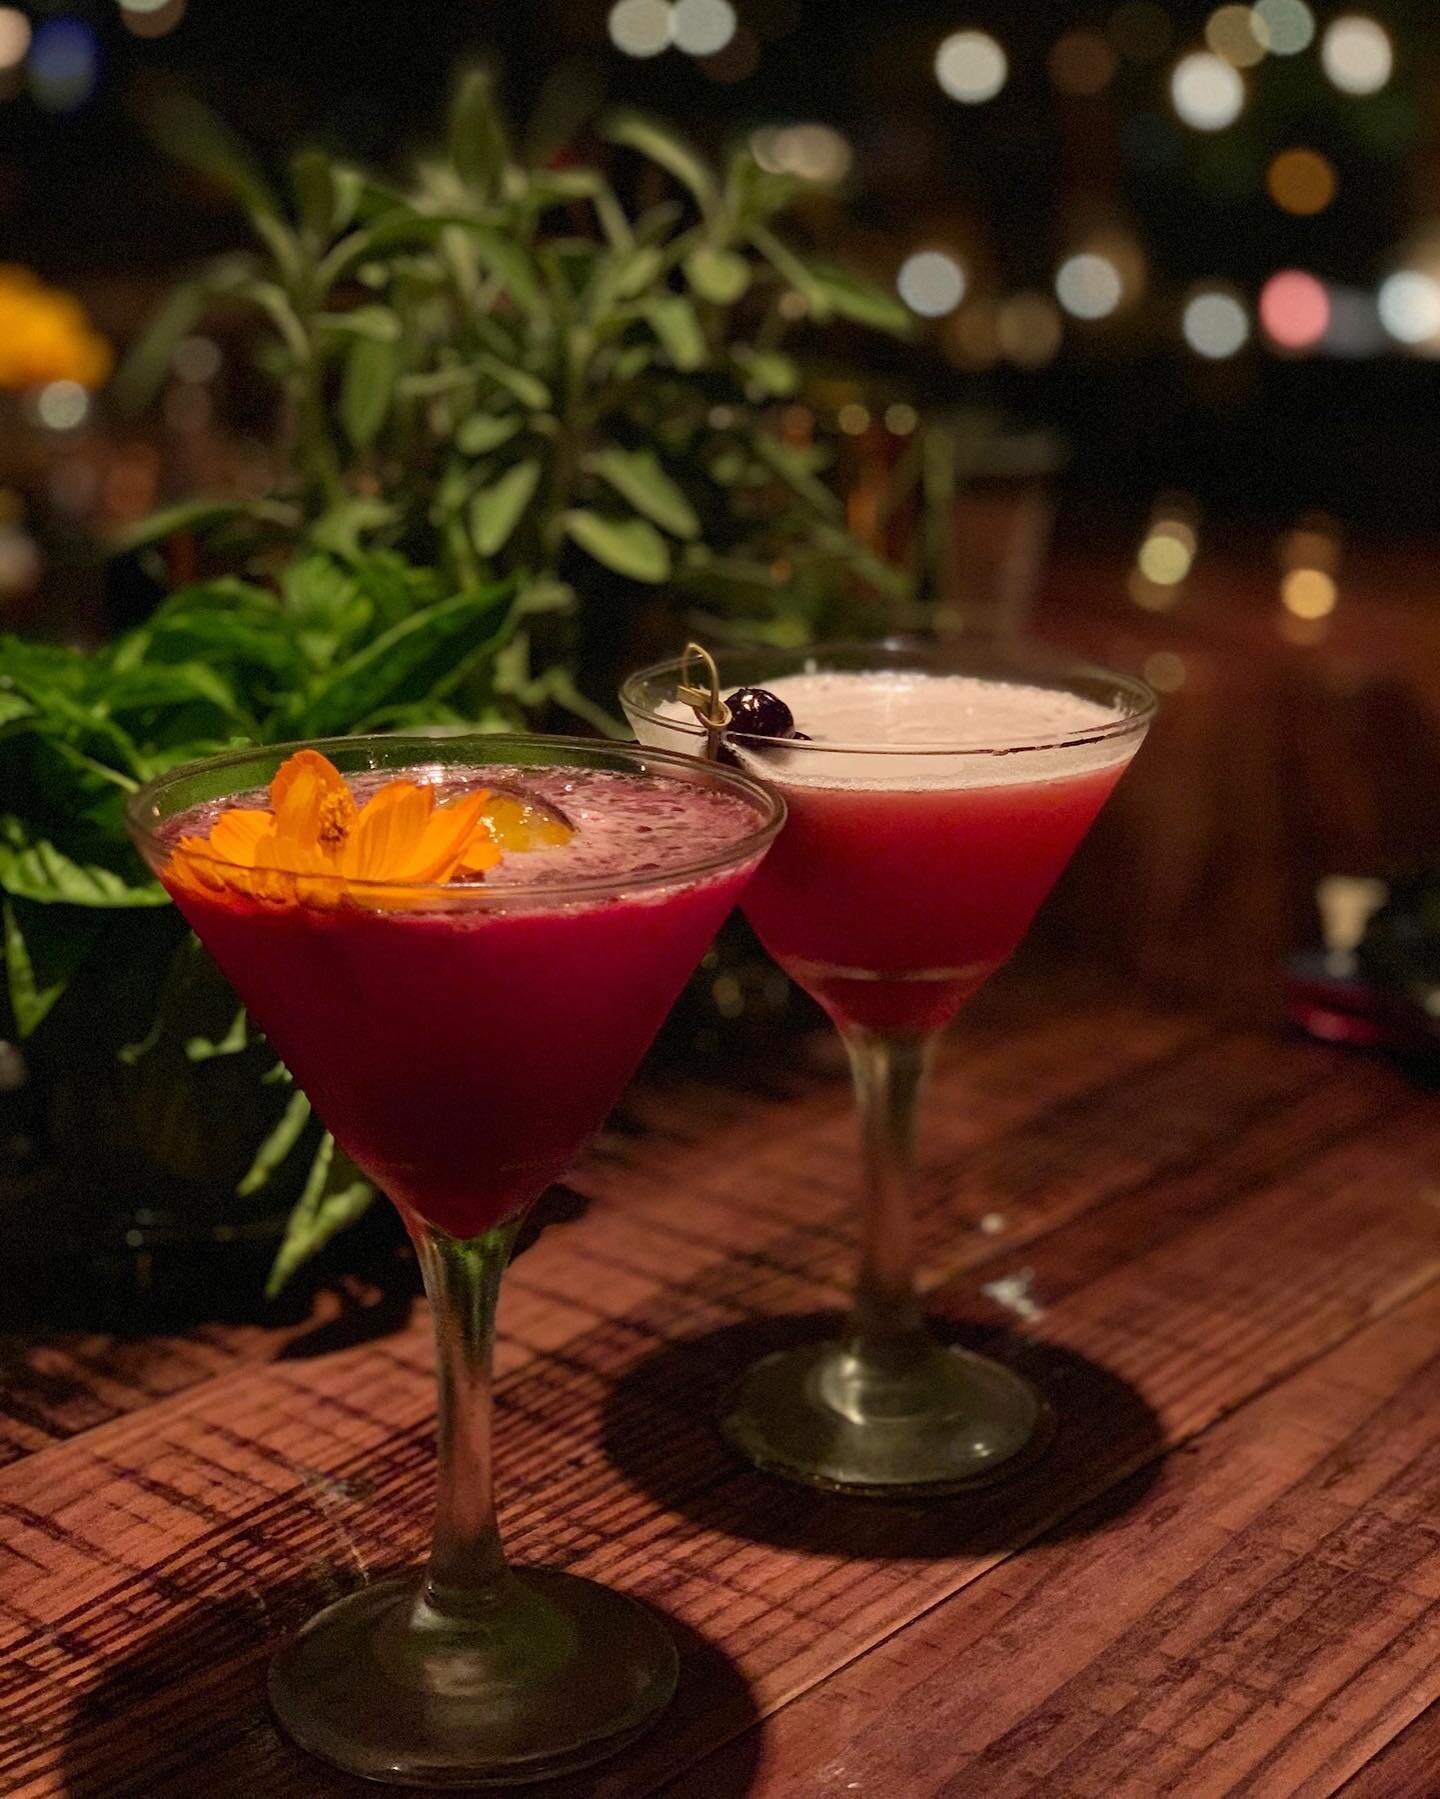 Happy Saturday, Cabo! What cocktails are you indulging in this weekend? ✨

🆆🅷🅰🆃 A couple of refreshing, handcrafted farm-tinis made with fresh ingredients straight from the garden. 

🆆🅷🅴🆁🅴 The Farm Bar &bull; @FloraFarms &bull; San Jos&eacut